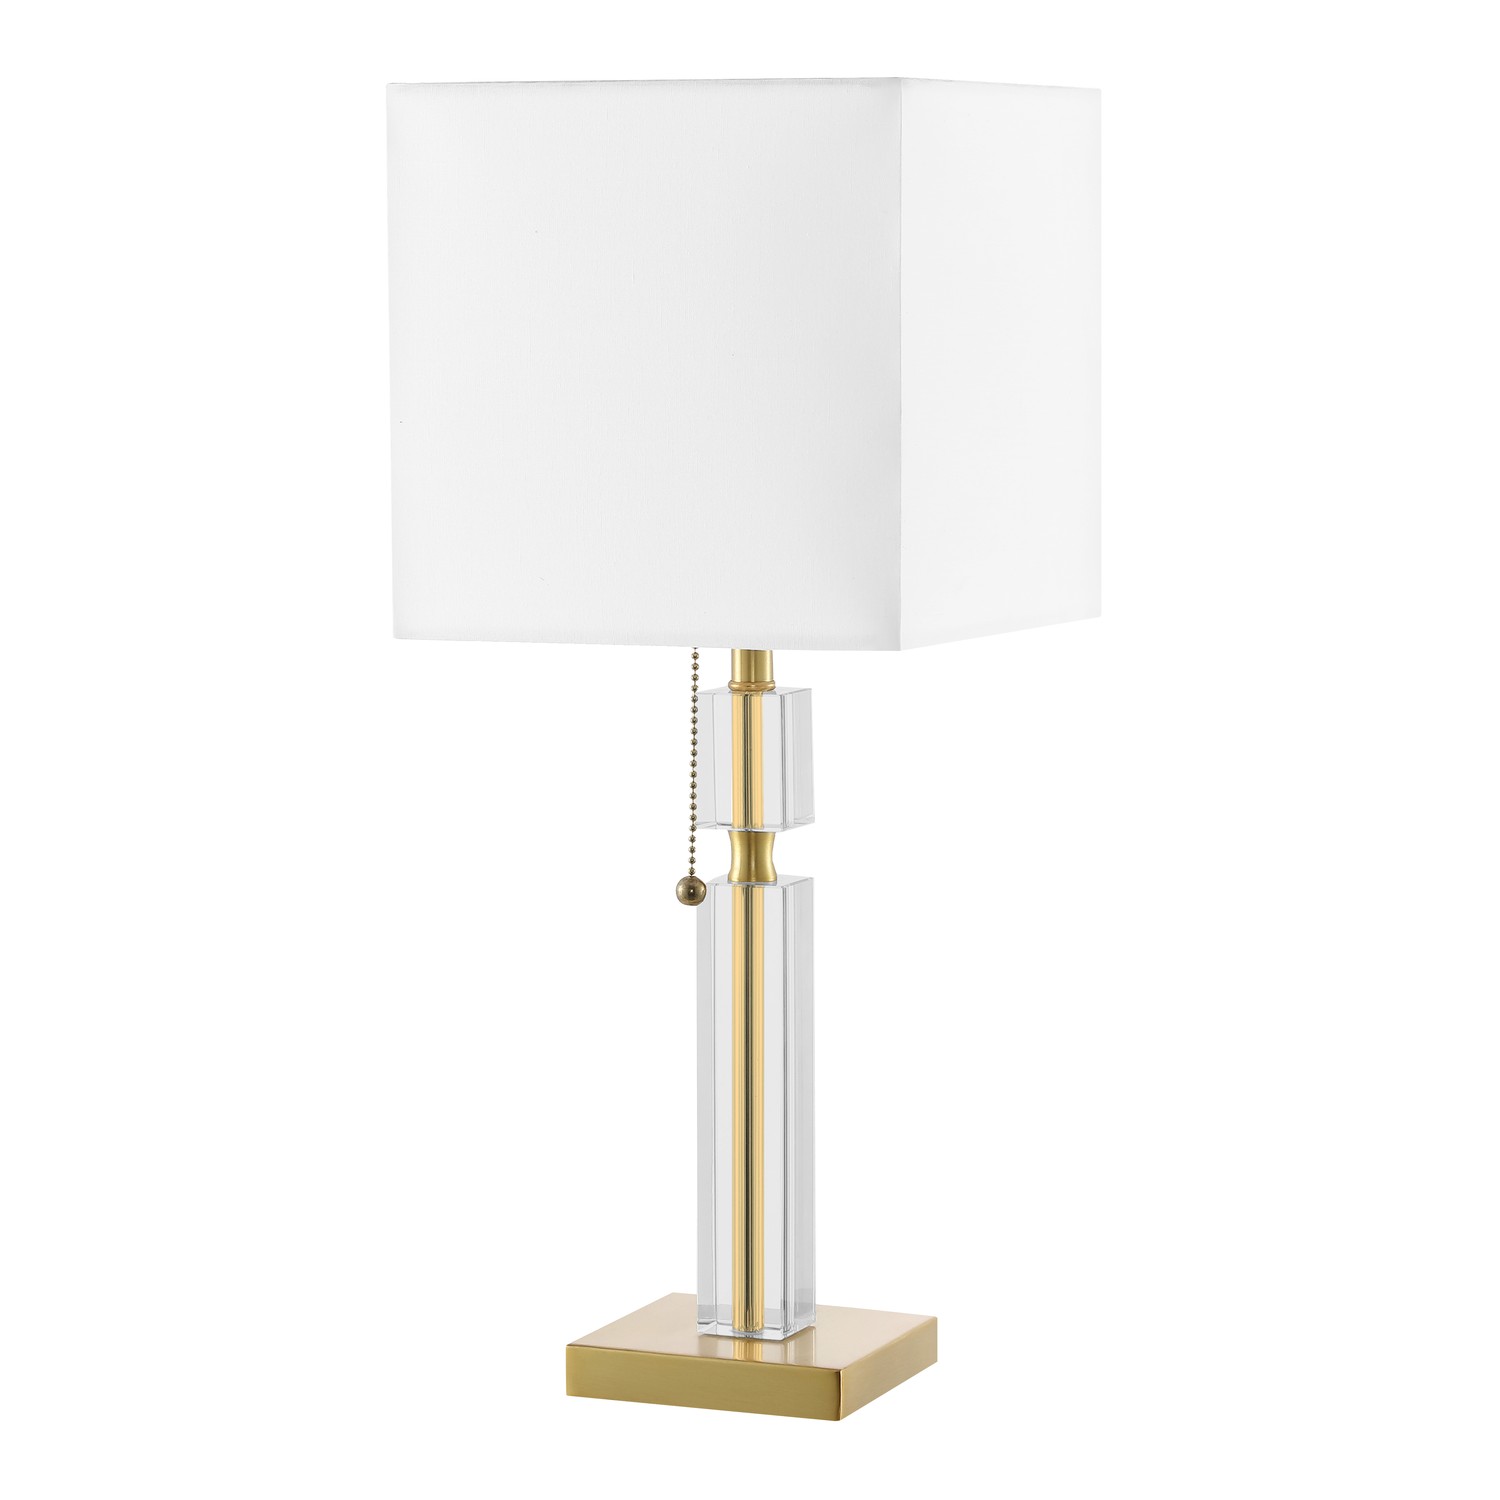 1 Light Incandescent Table Lamp Aged Brass with White Shade